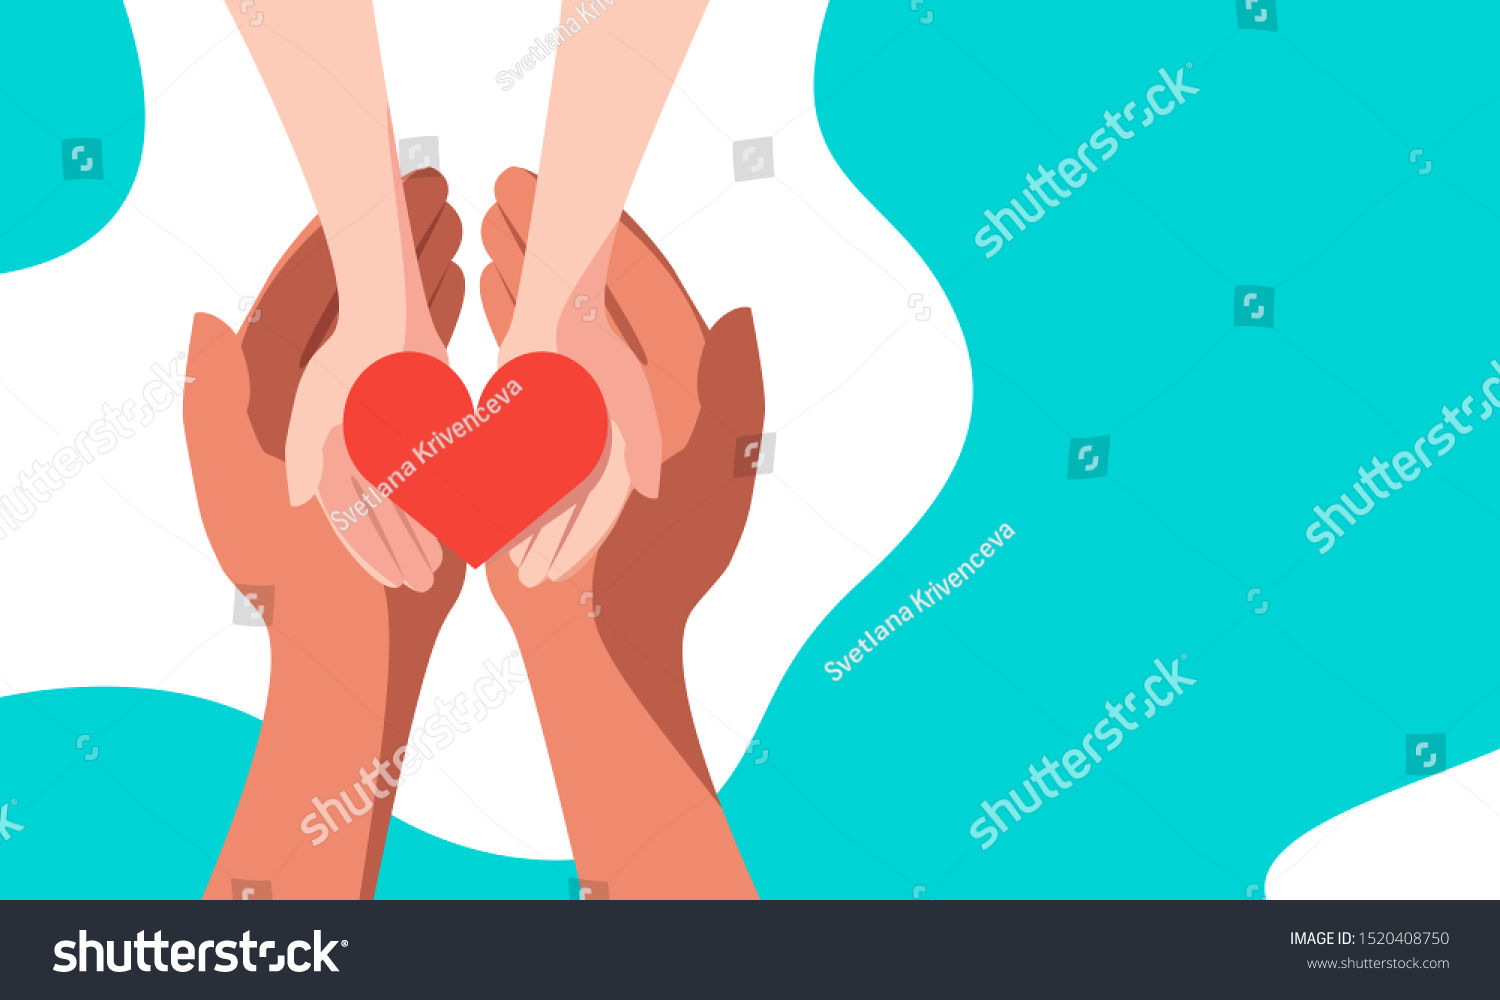 Red heart in the hands of man. A symbol of goodness, mercy, hope and love. Vector illustration in flat style. #1520408750